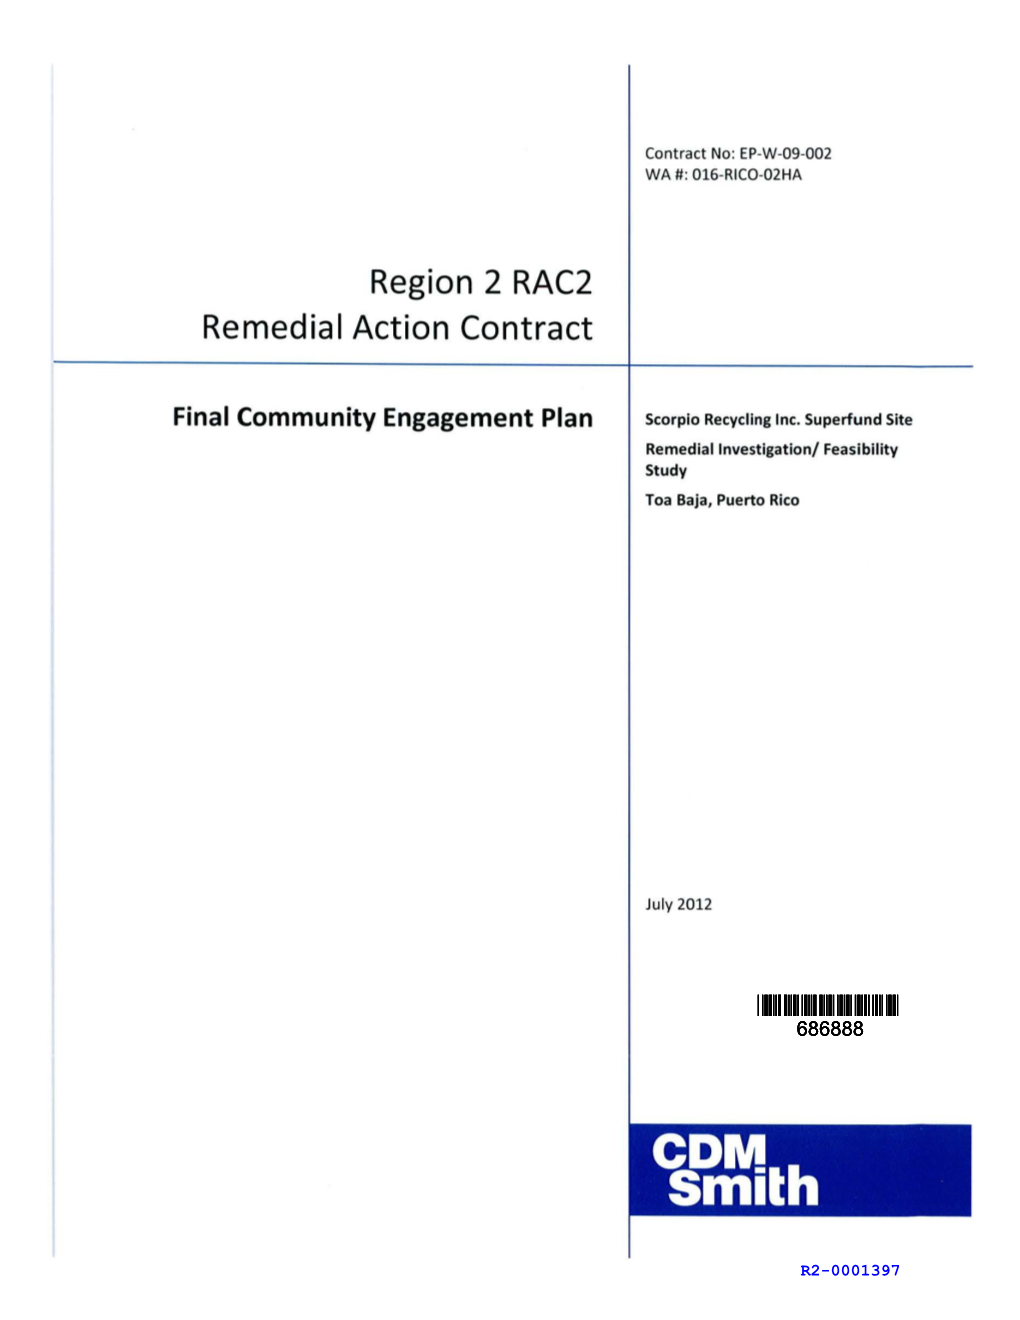 Region 2 RAC2 Remedial Action Contract